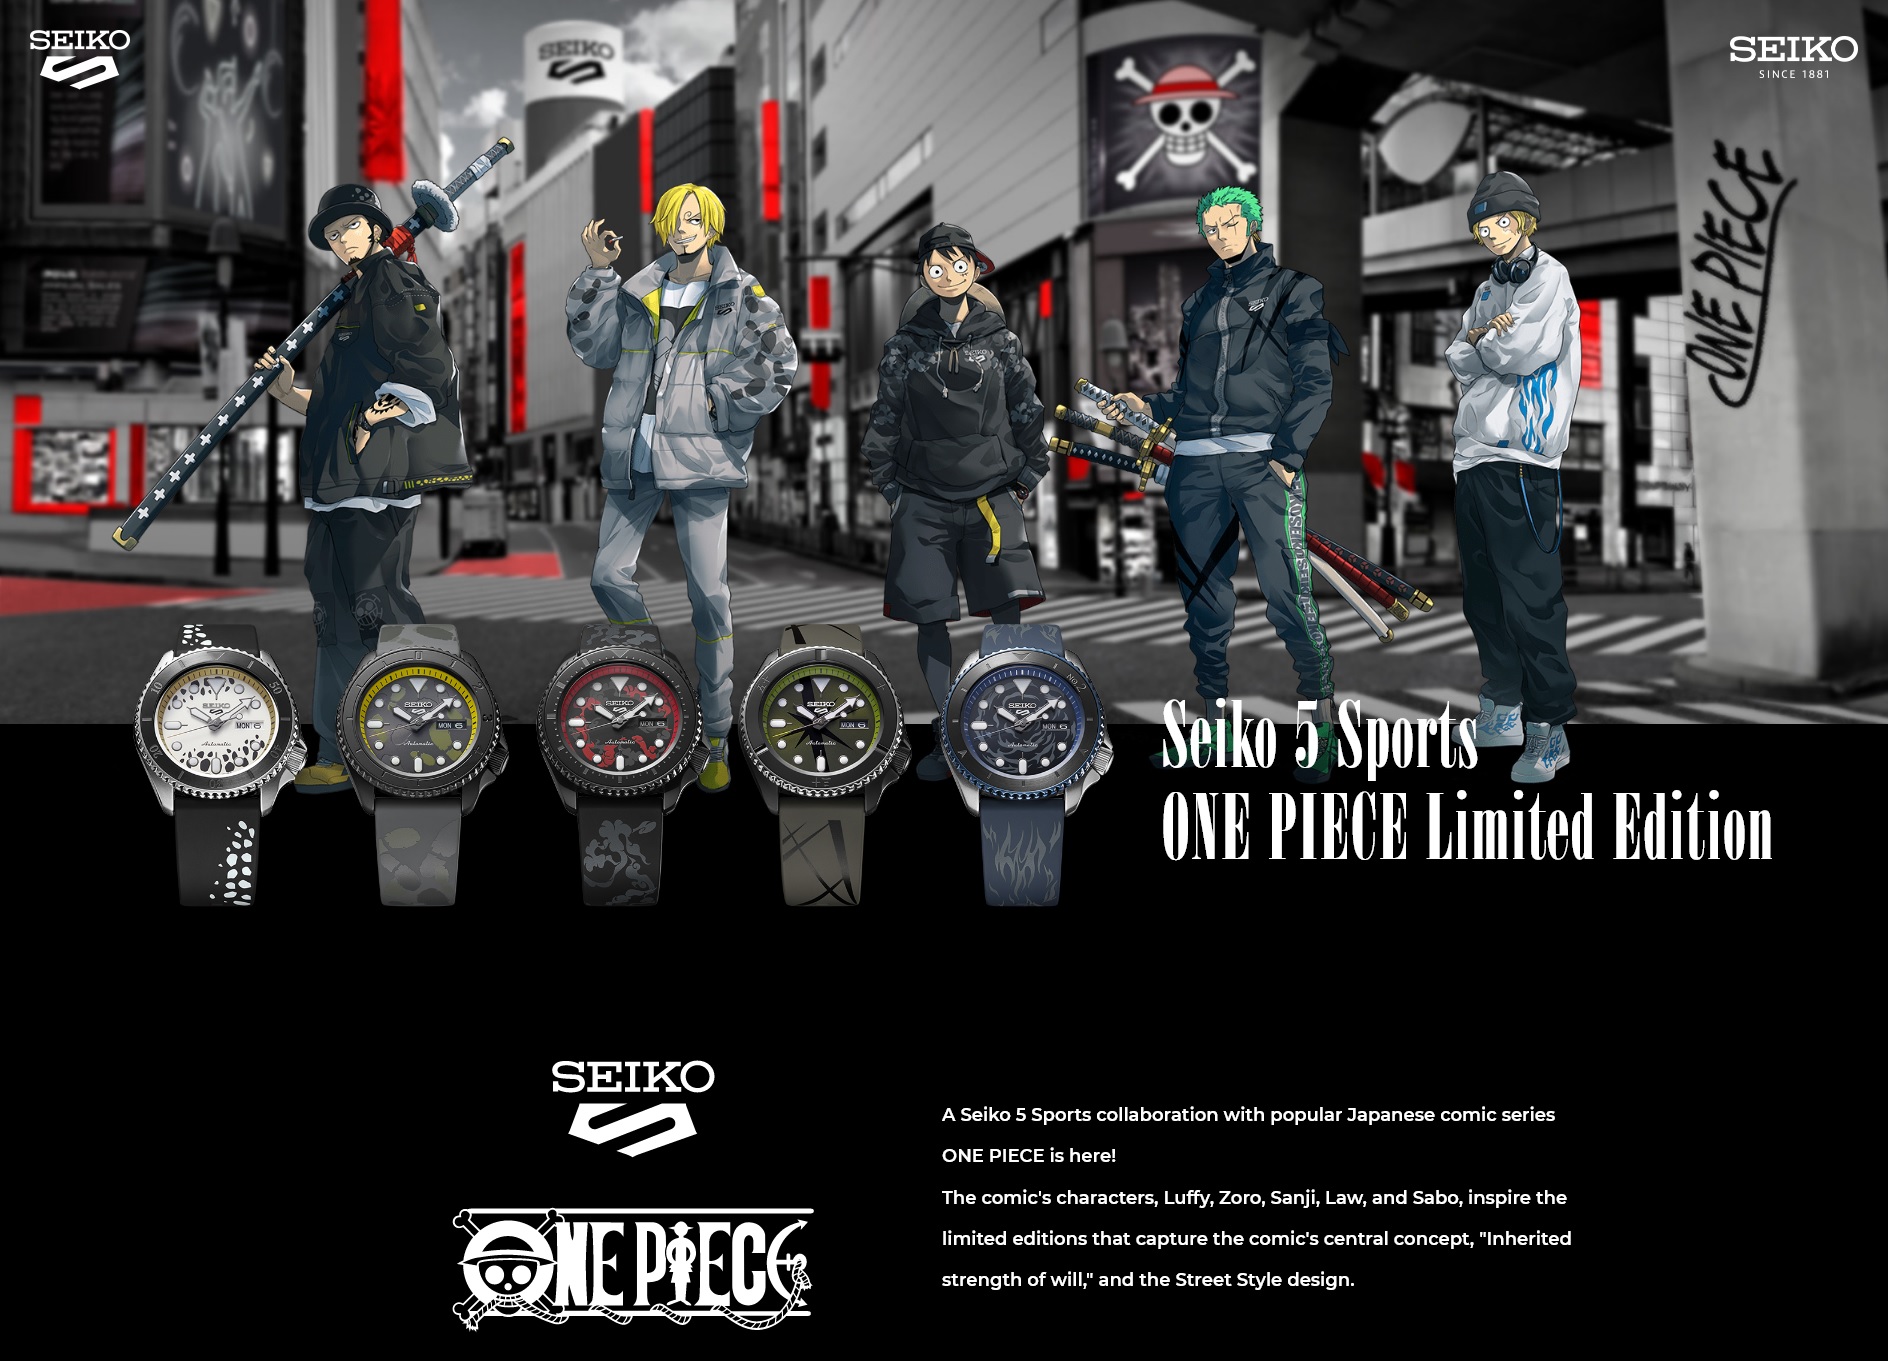 I Am Going To Get A New Toy – The Seiko 5 Sports One Piece Limited Edition  | GenX GenY GenZ